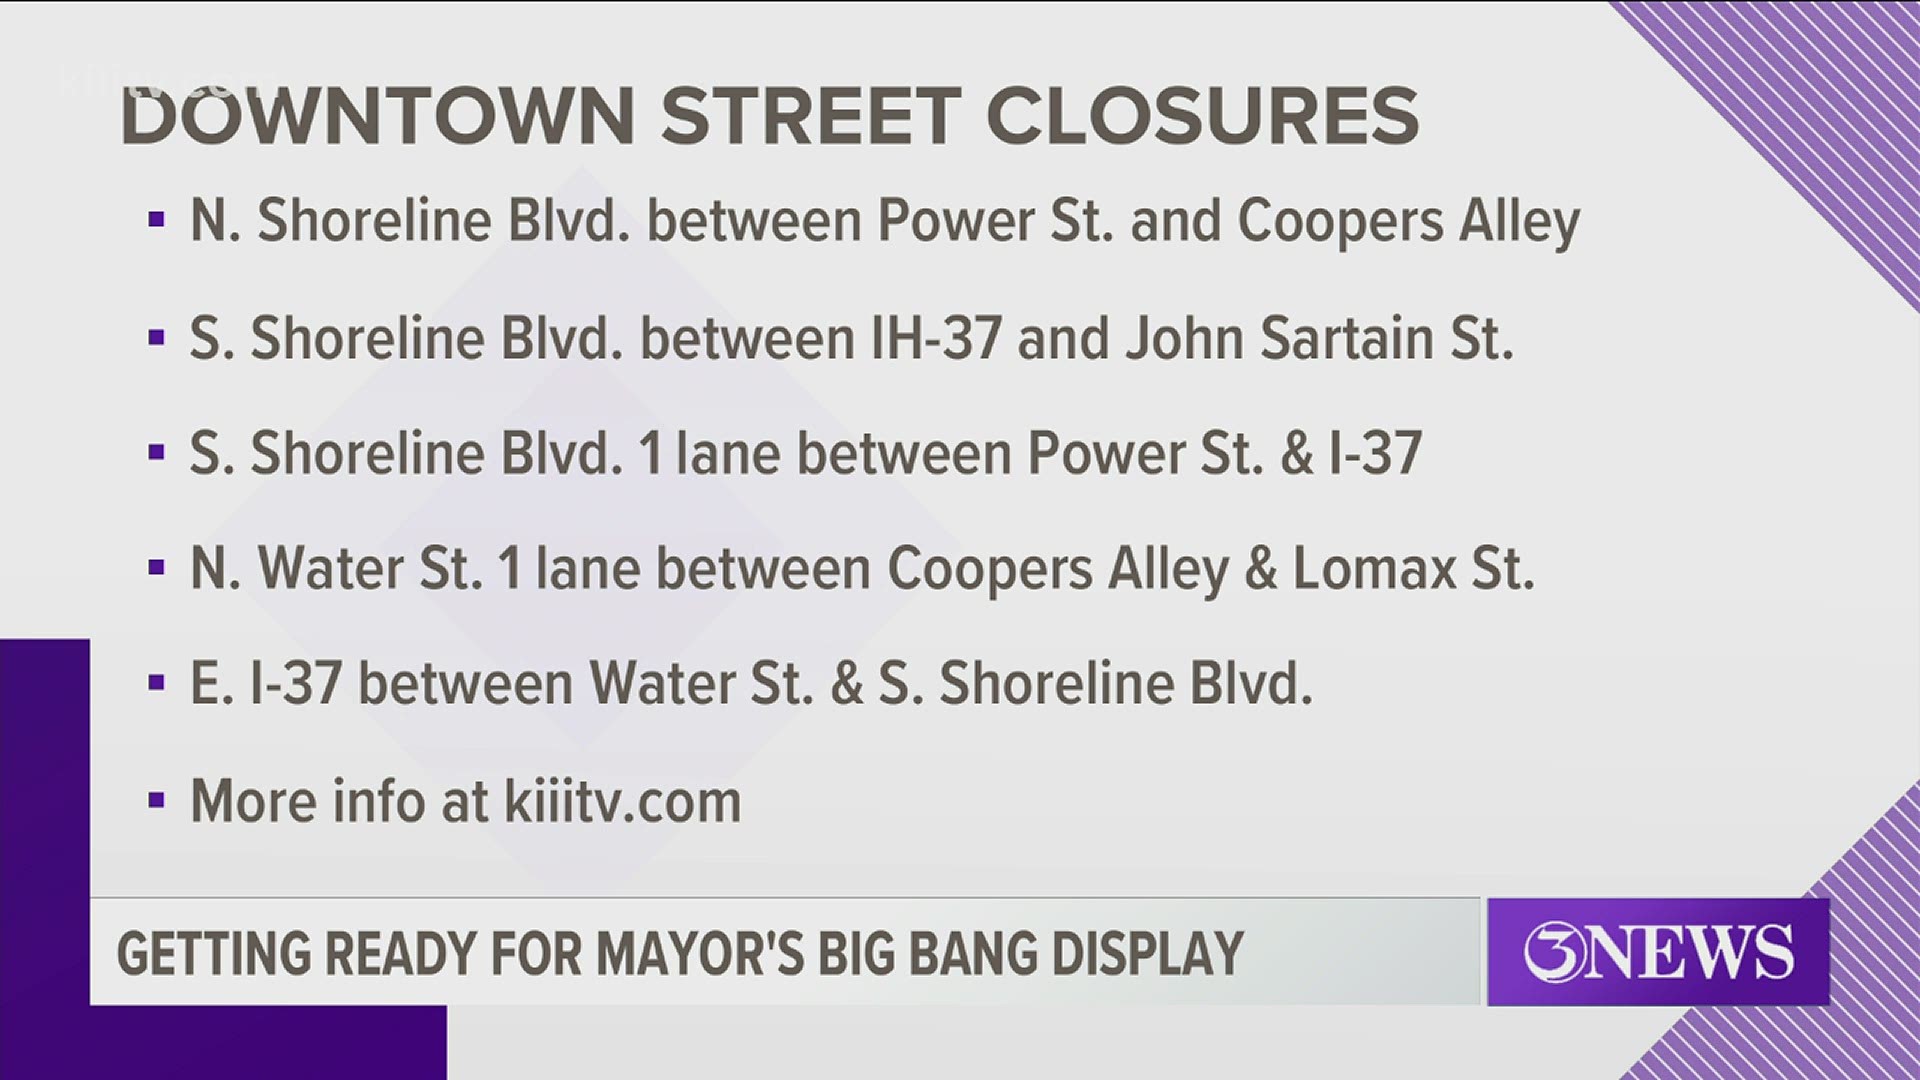 Several roads are closed ahead of the Big Bang Celebration